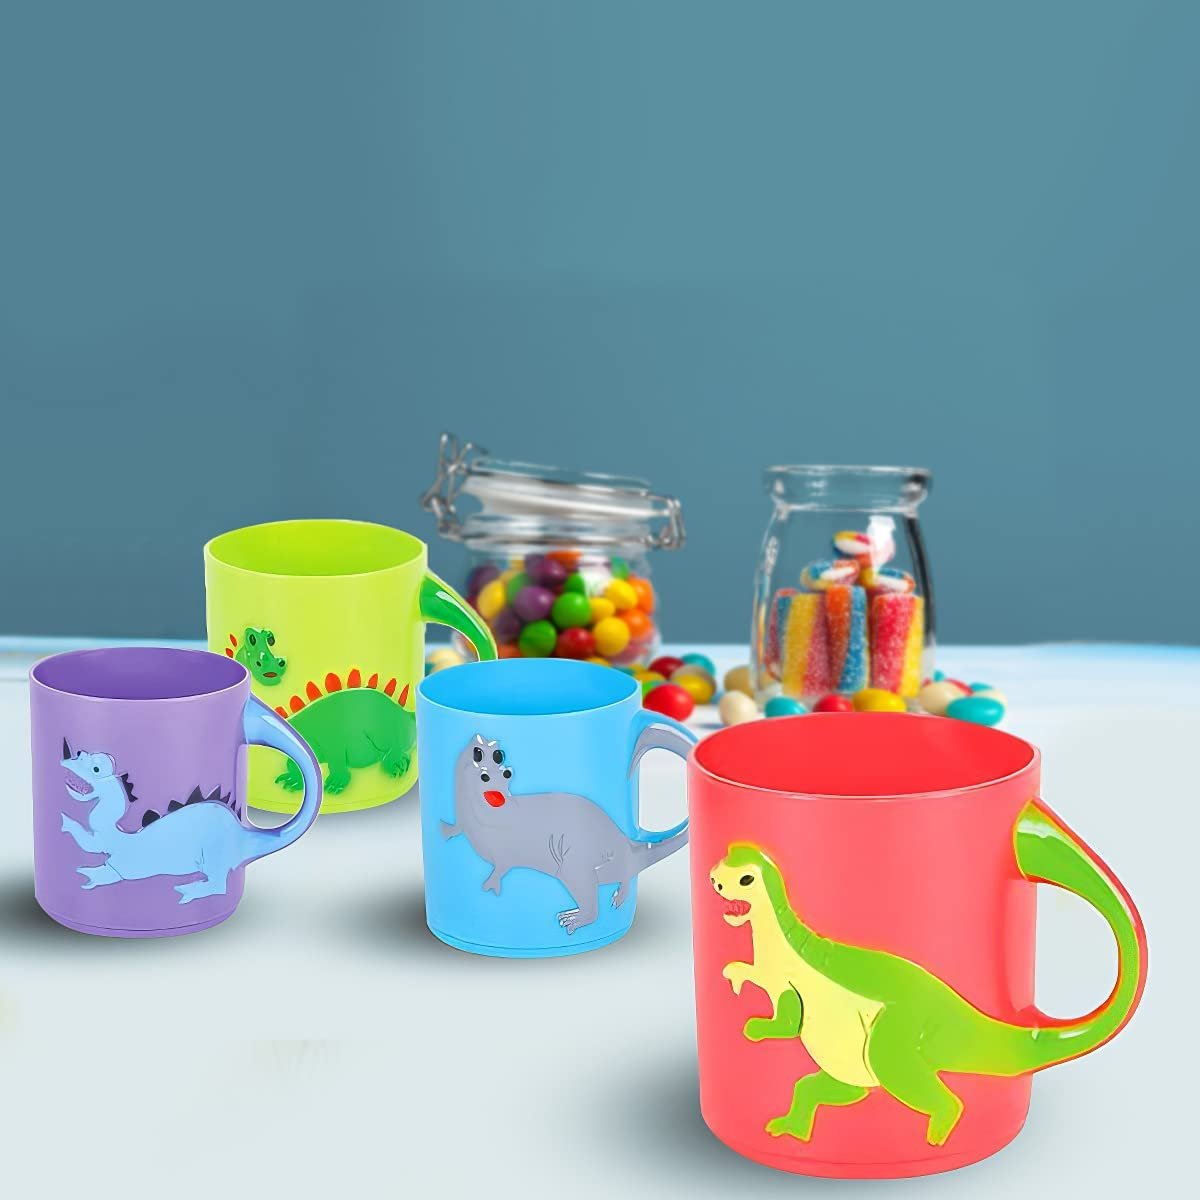 ArtCreativity Dinosaur Mugs for Kids, Set of 4, Plastic Dino Cups in Assorted Colors & Designs, Dinosaur Party Favors, Dinosaur Gifts for Boys and Girls, Unique Table Decorations for Themed Parties